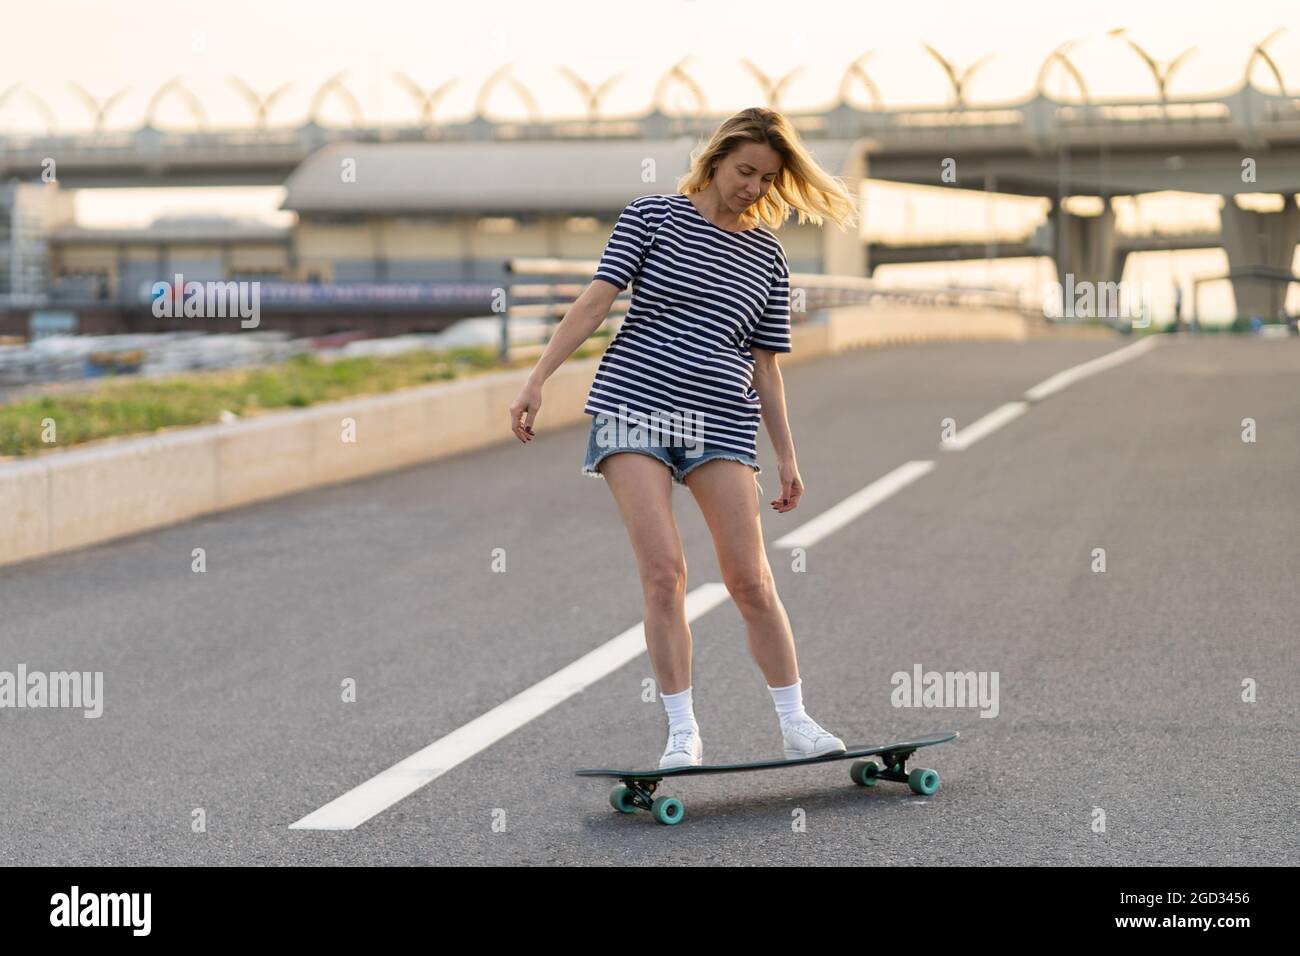 https://c8.alamy.com/comp/2GD3456/active-adult-woman-longboarder-riding-longboard-on-empty-road-female-relax-on-skateboard-after-work-2GD3456.jpg